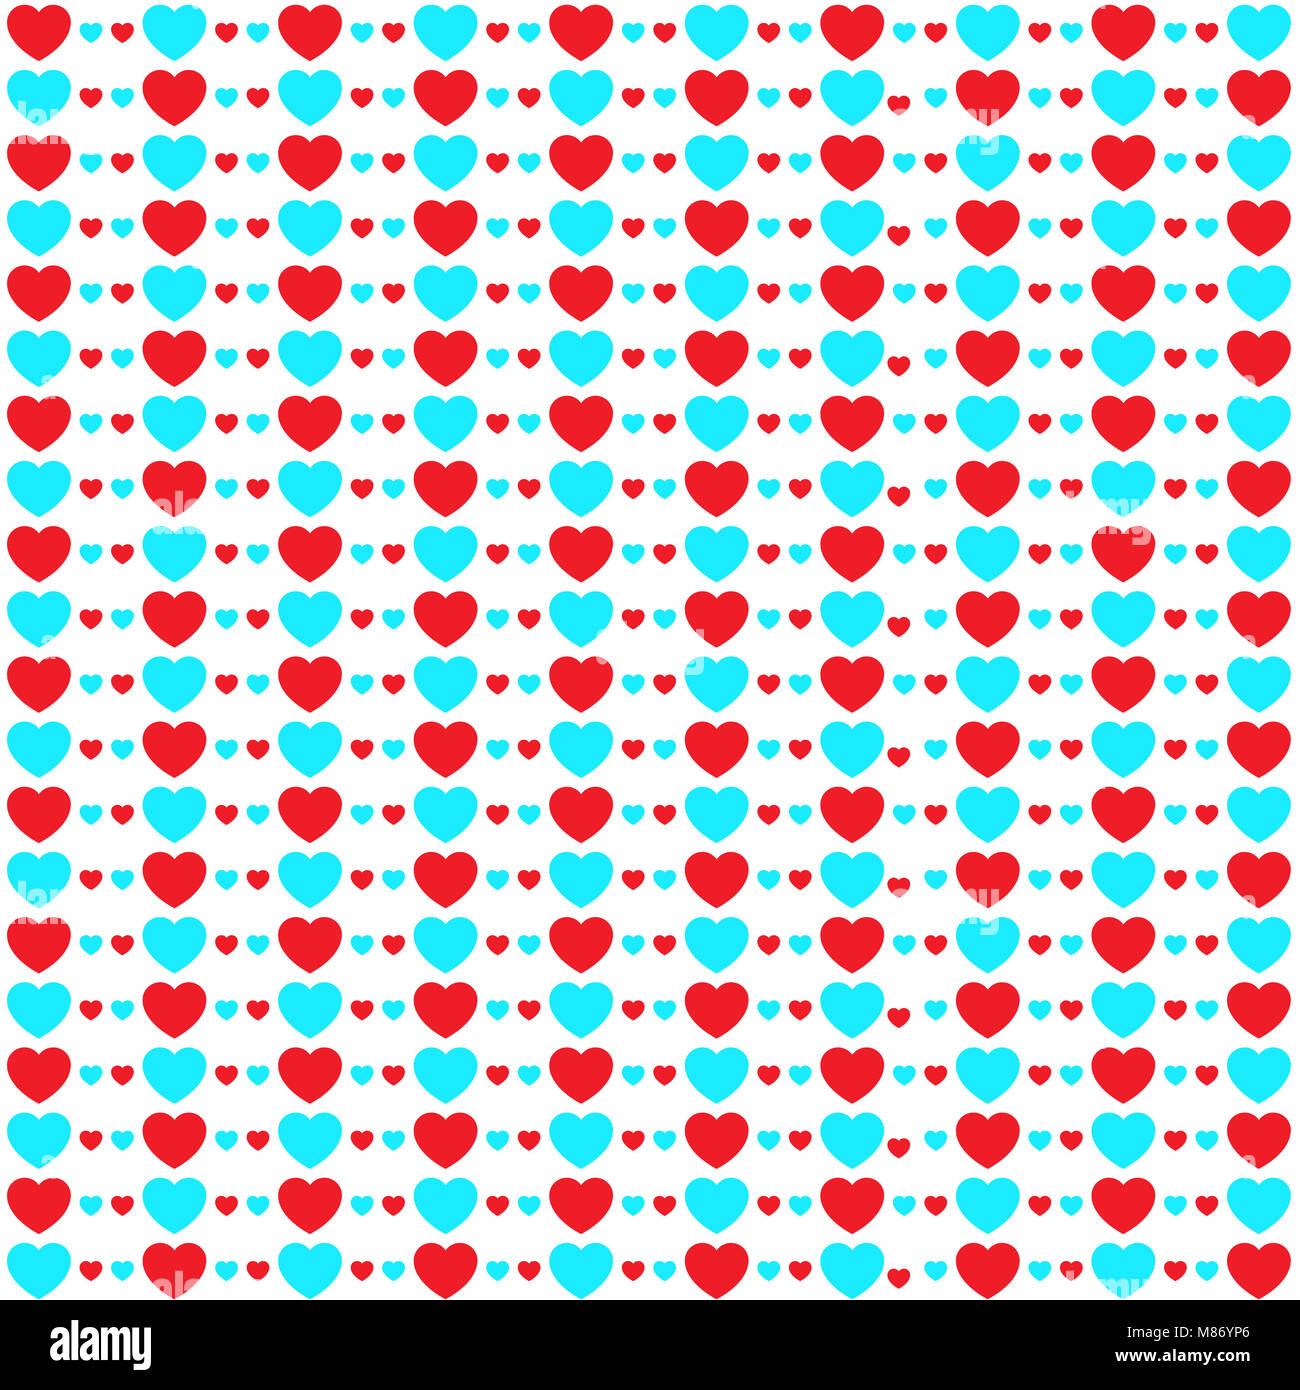 Blue and red hearts on white background Stock Photo